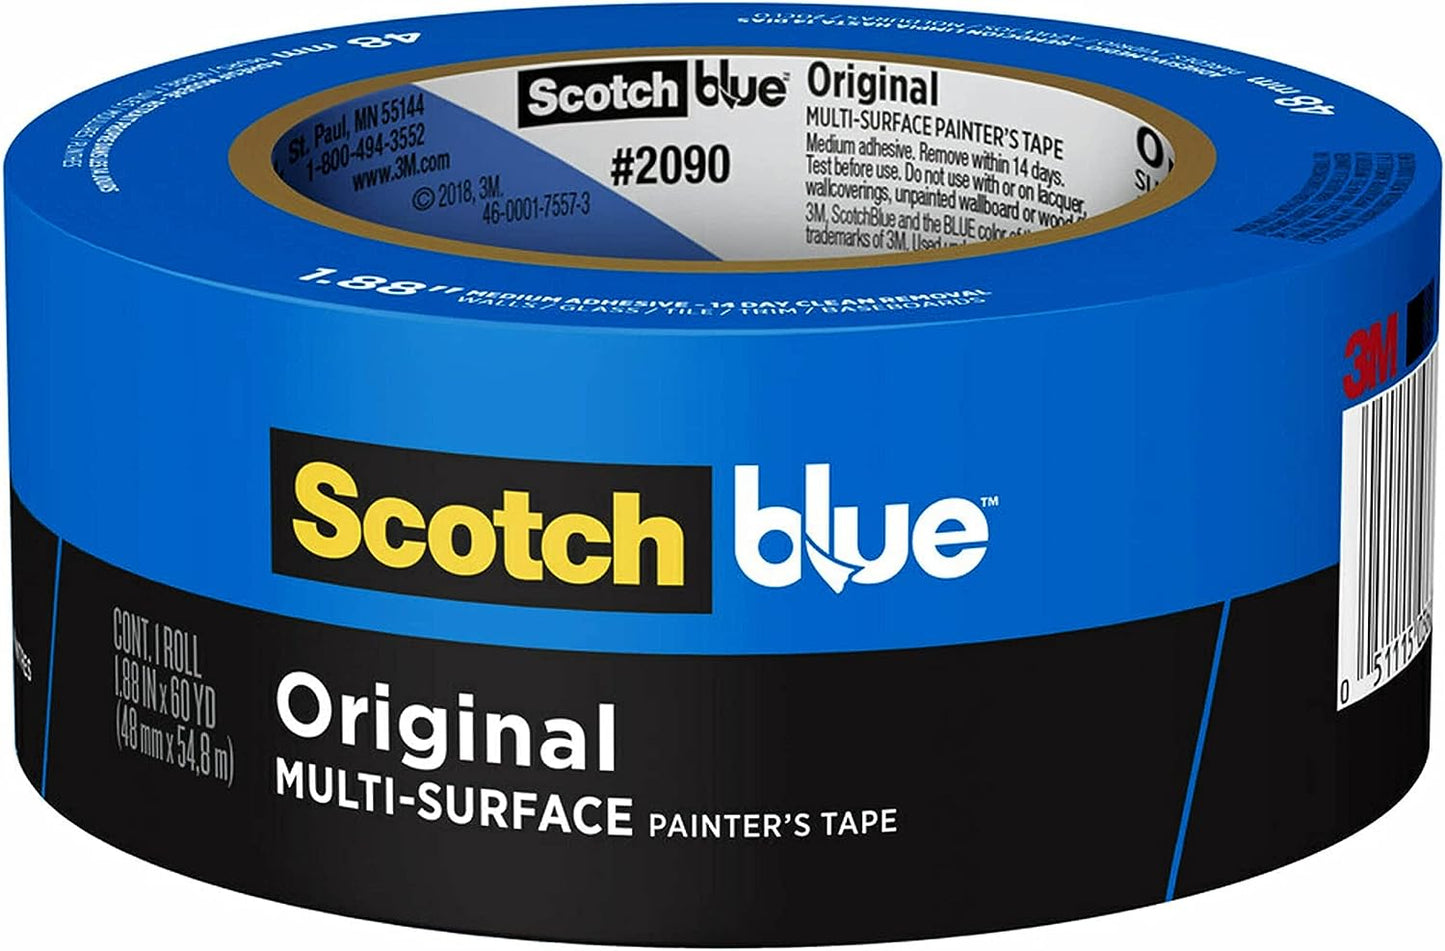 ScotchBlue Original Multi-Surface Painter's Tape, 1.88 Inches x 60 Yards, 1 Roll, Blue